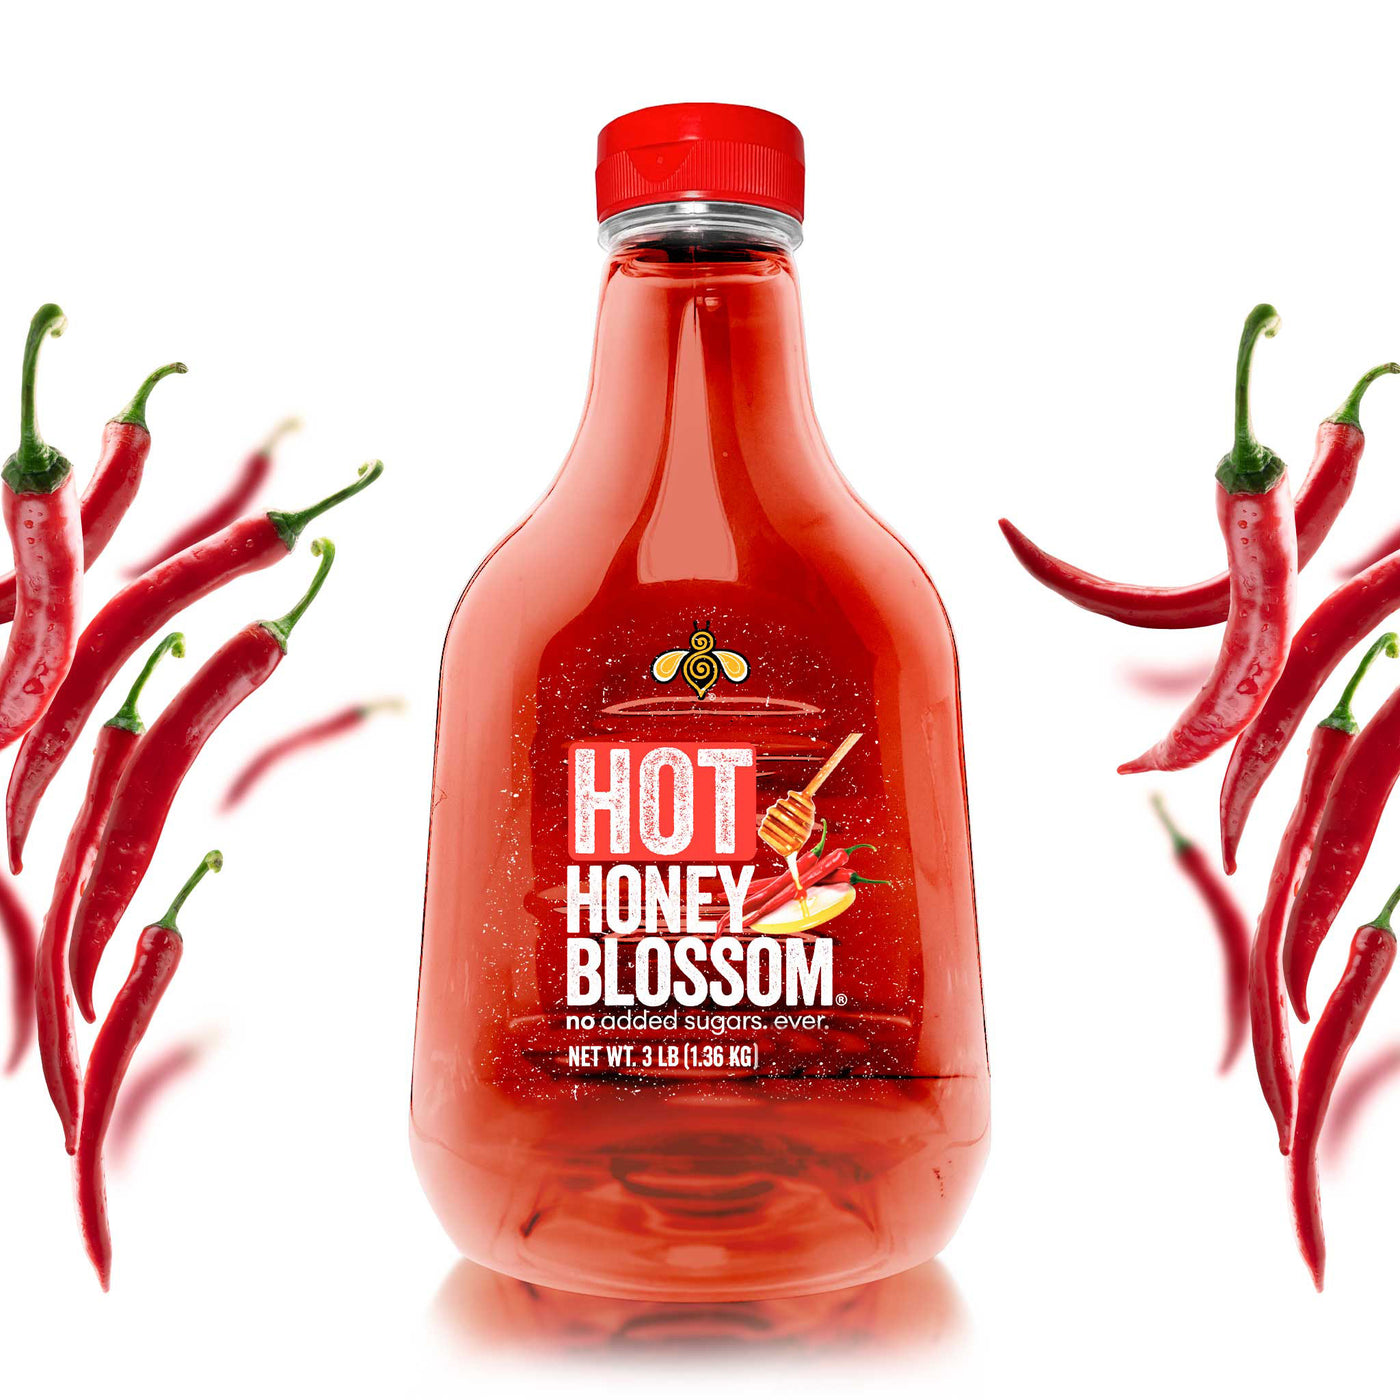 A 3 lb bottle, filled with hot honey surrounded by cayenne peppers